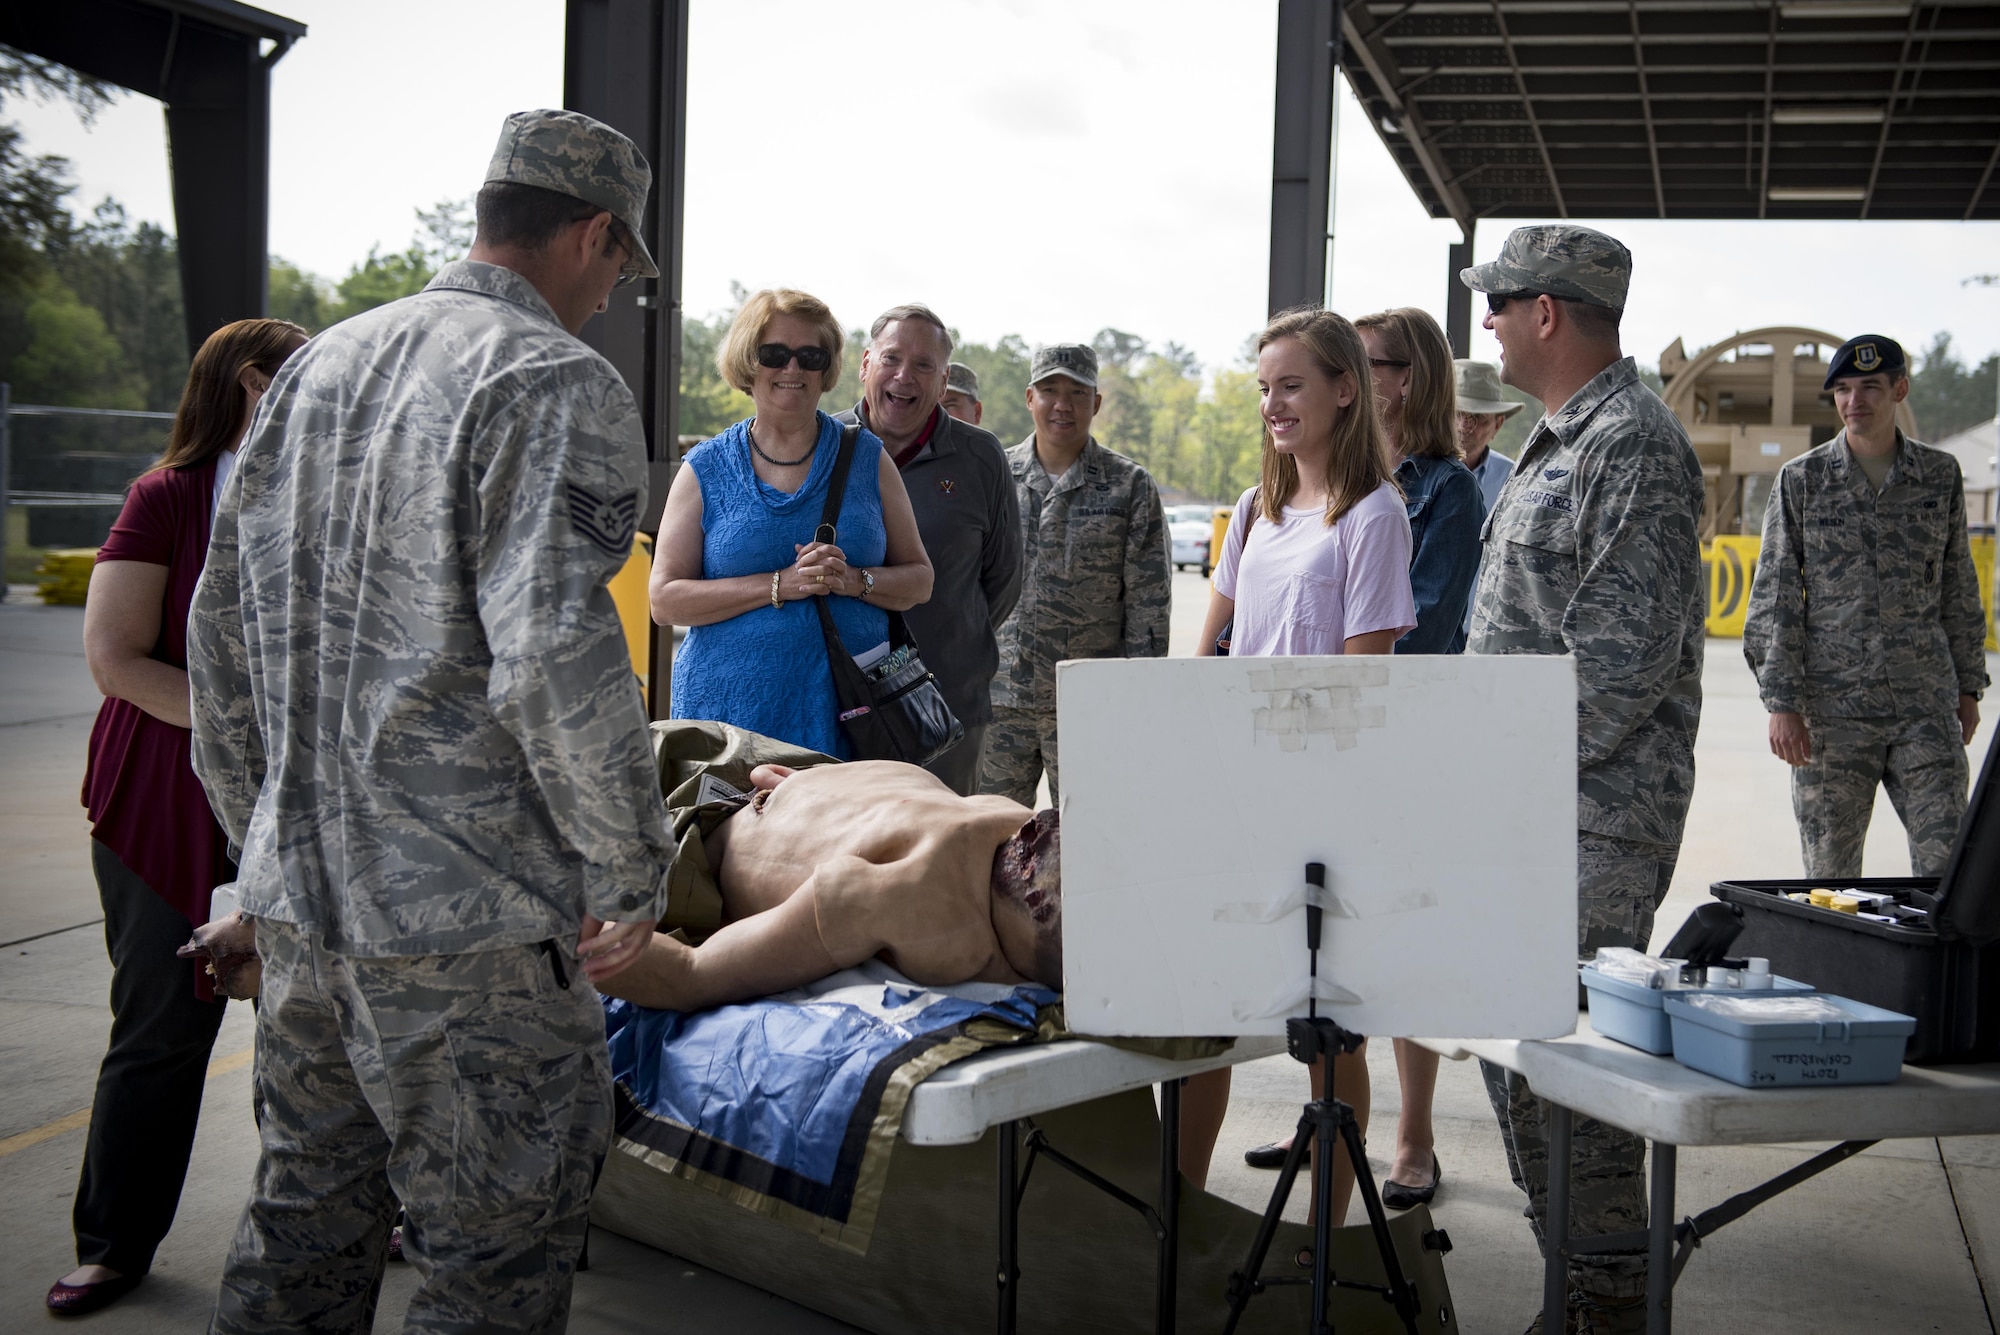 Guests observe a medical training display during the 820th Base Defense Group anniversary, March 27, 2017, at Moody Air Force Base, Ga. The anniversary commemorated 20 years since the activation of the 820th BDG and allowed guests to reminisce on their history, honor those they’ve lost, and witness a tactical demonstration. (U.S. Air Force photo by Airman 1st Class Lauren M. Sprunk)